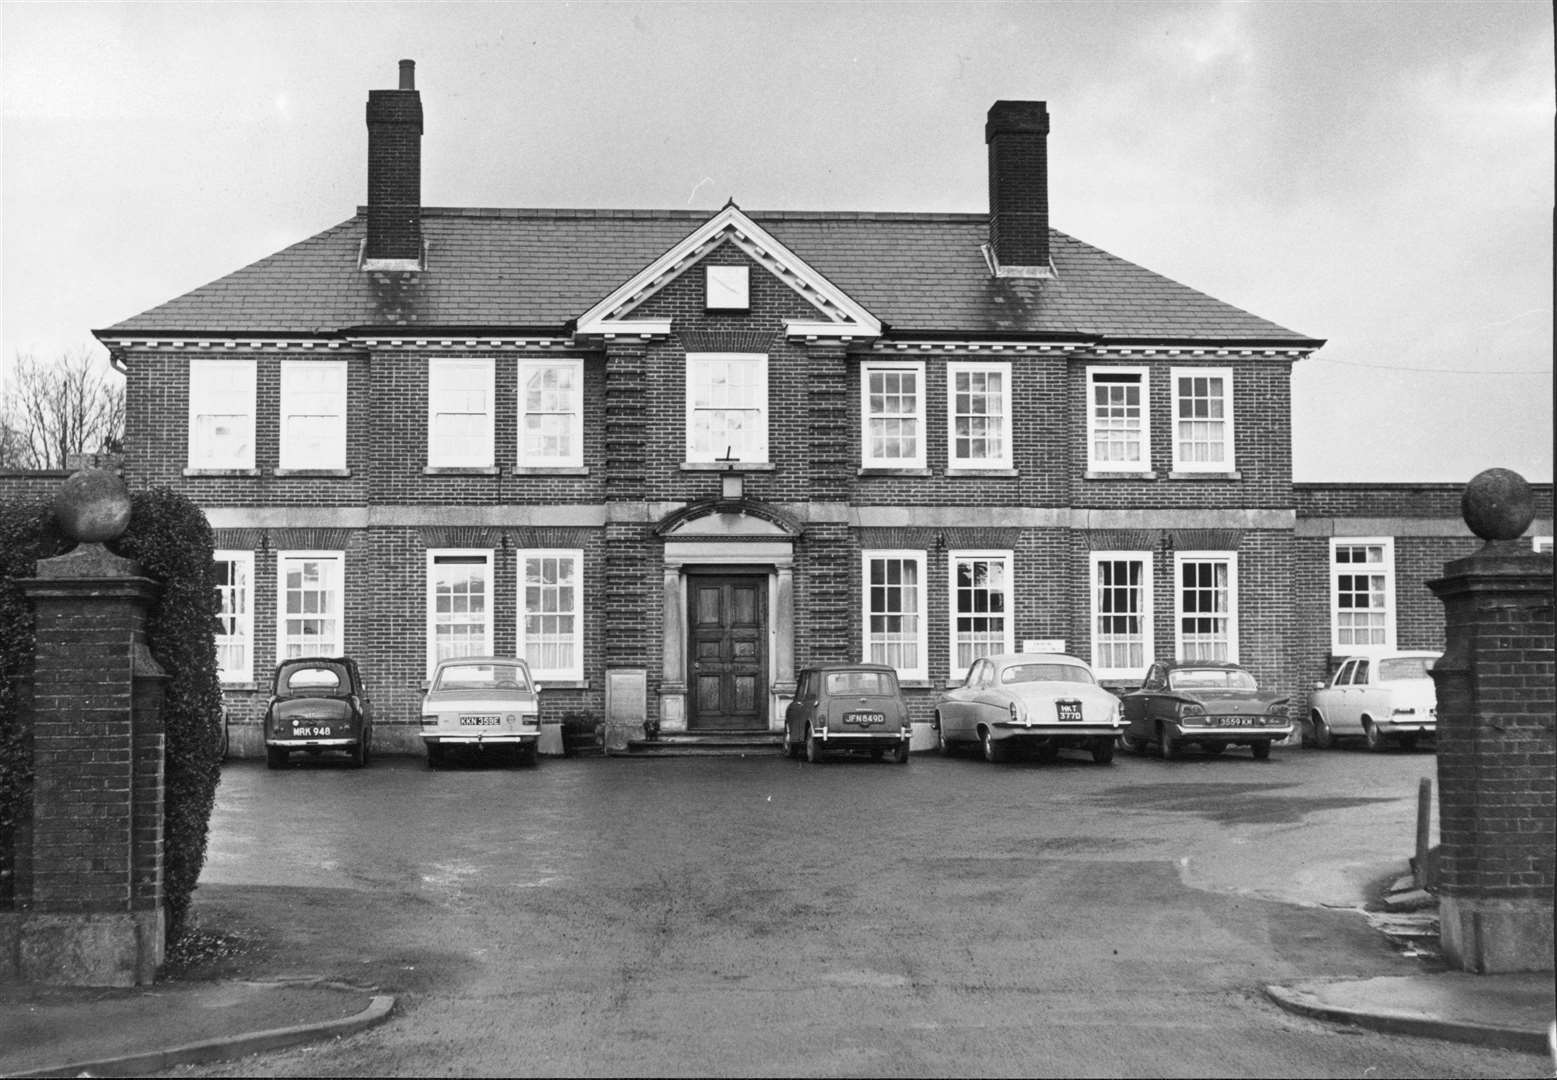 The former Ashford Hospital, pictured in 1968